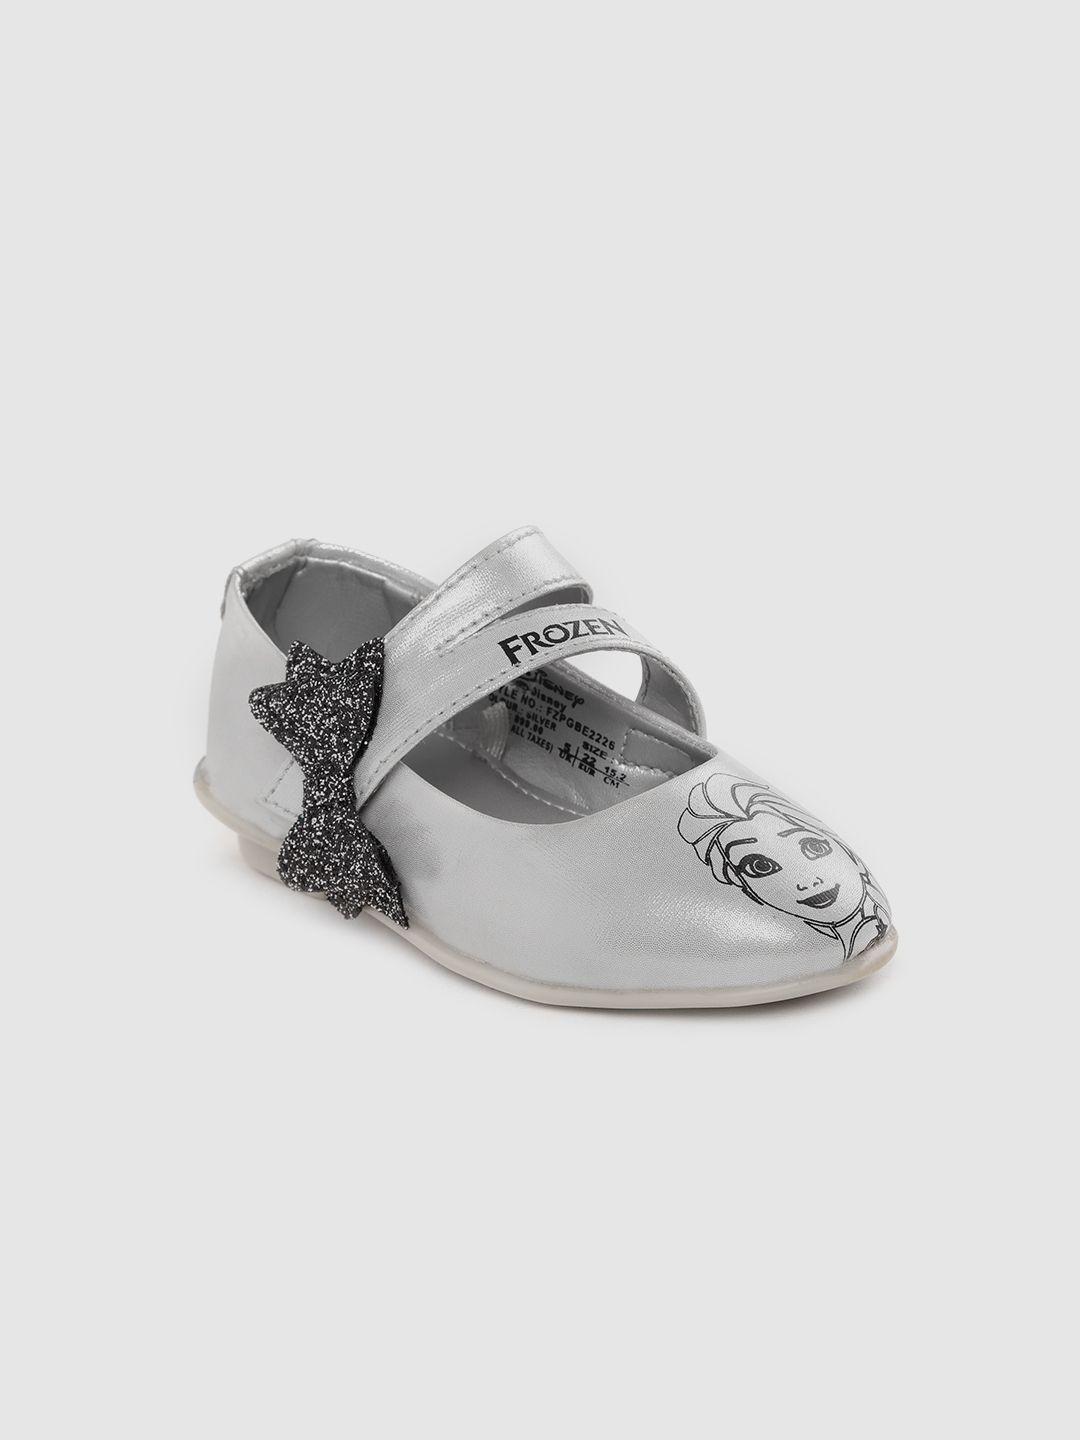 frozen girls silver-toned & black printed mary janes